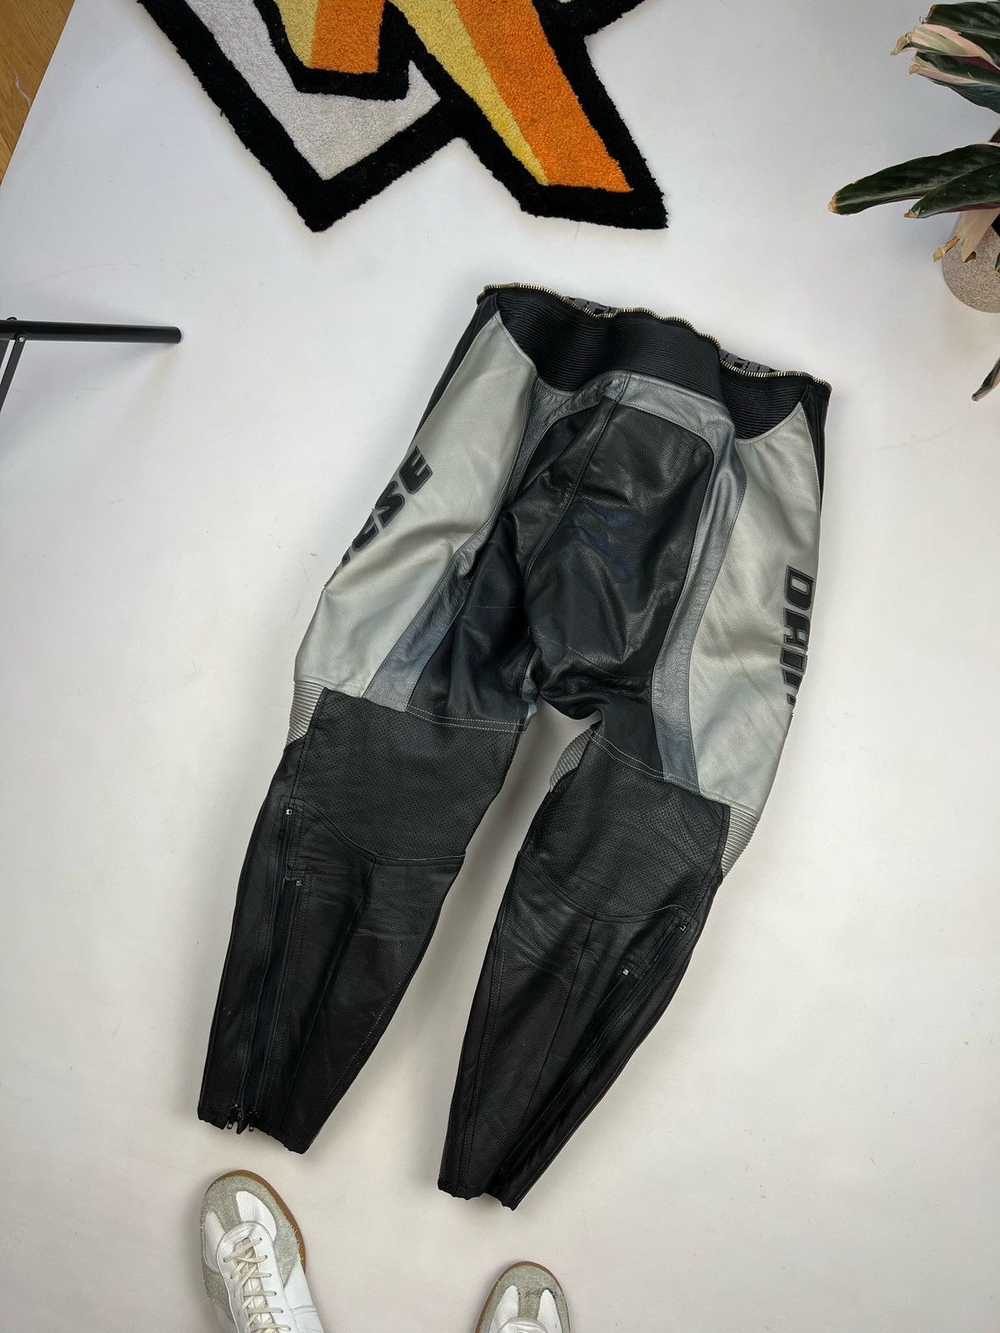 Dainese × MOTO × Racing Dainese Leather Suit Supe… - image 4